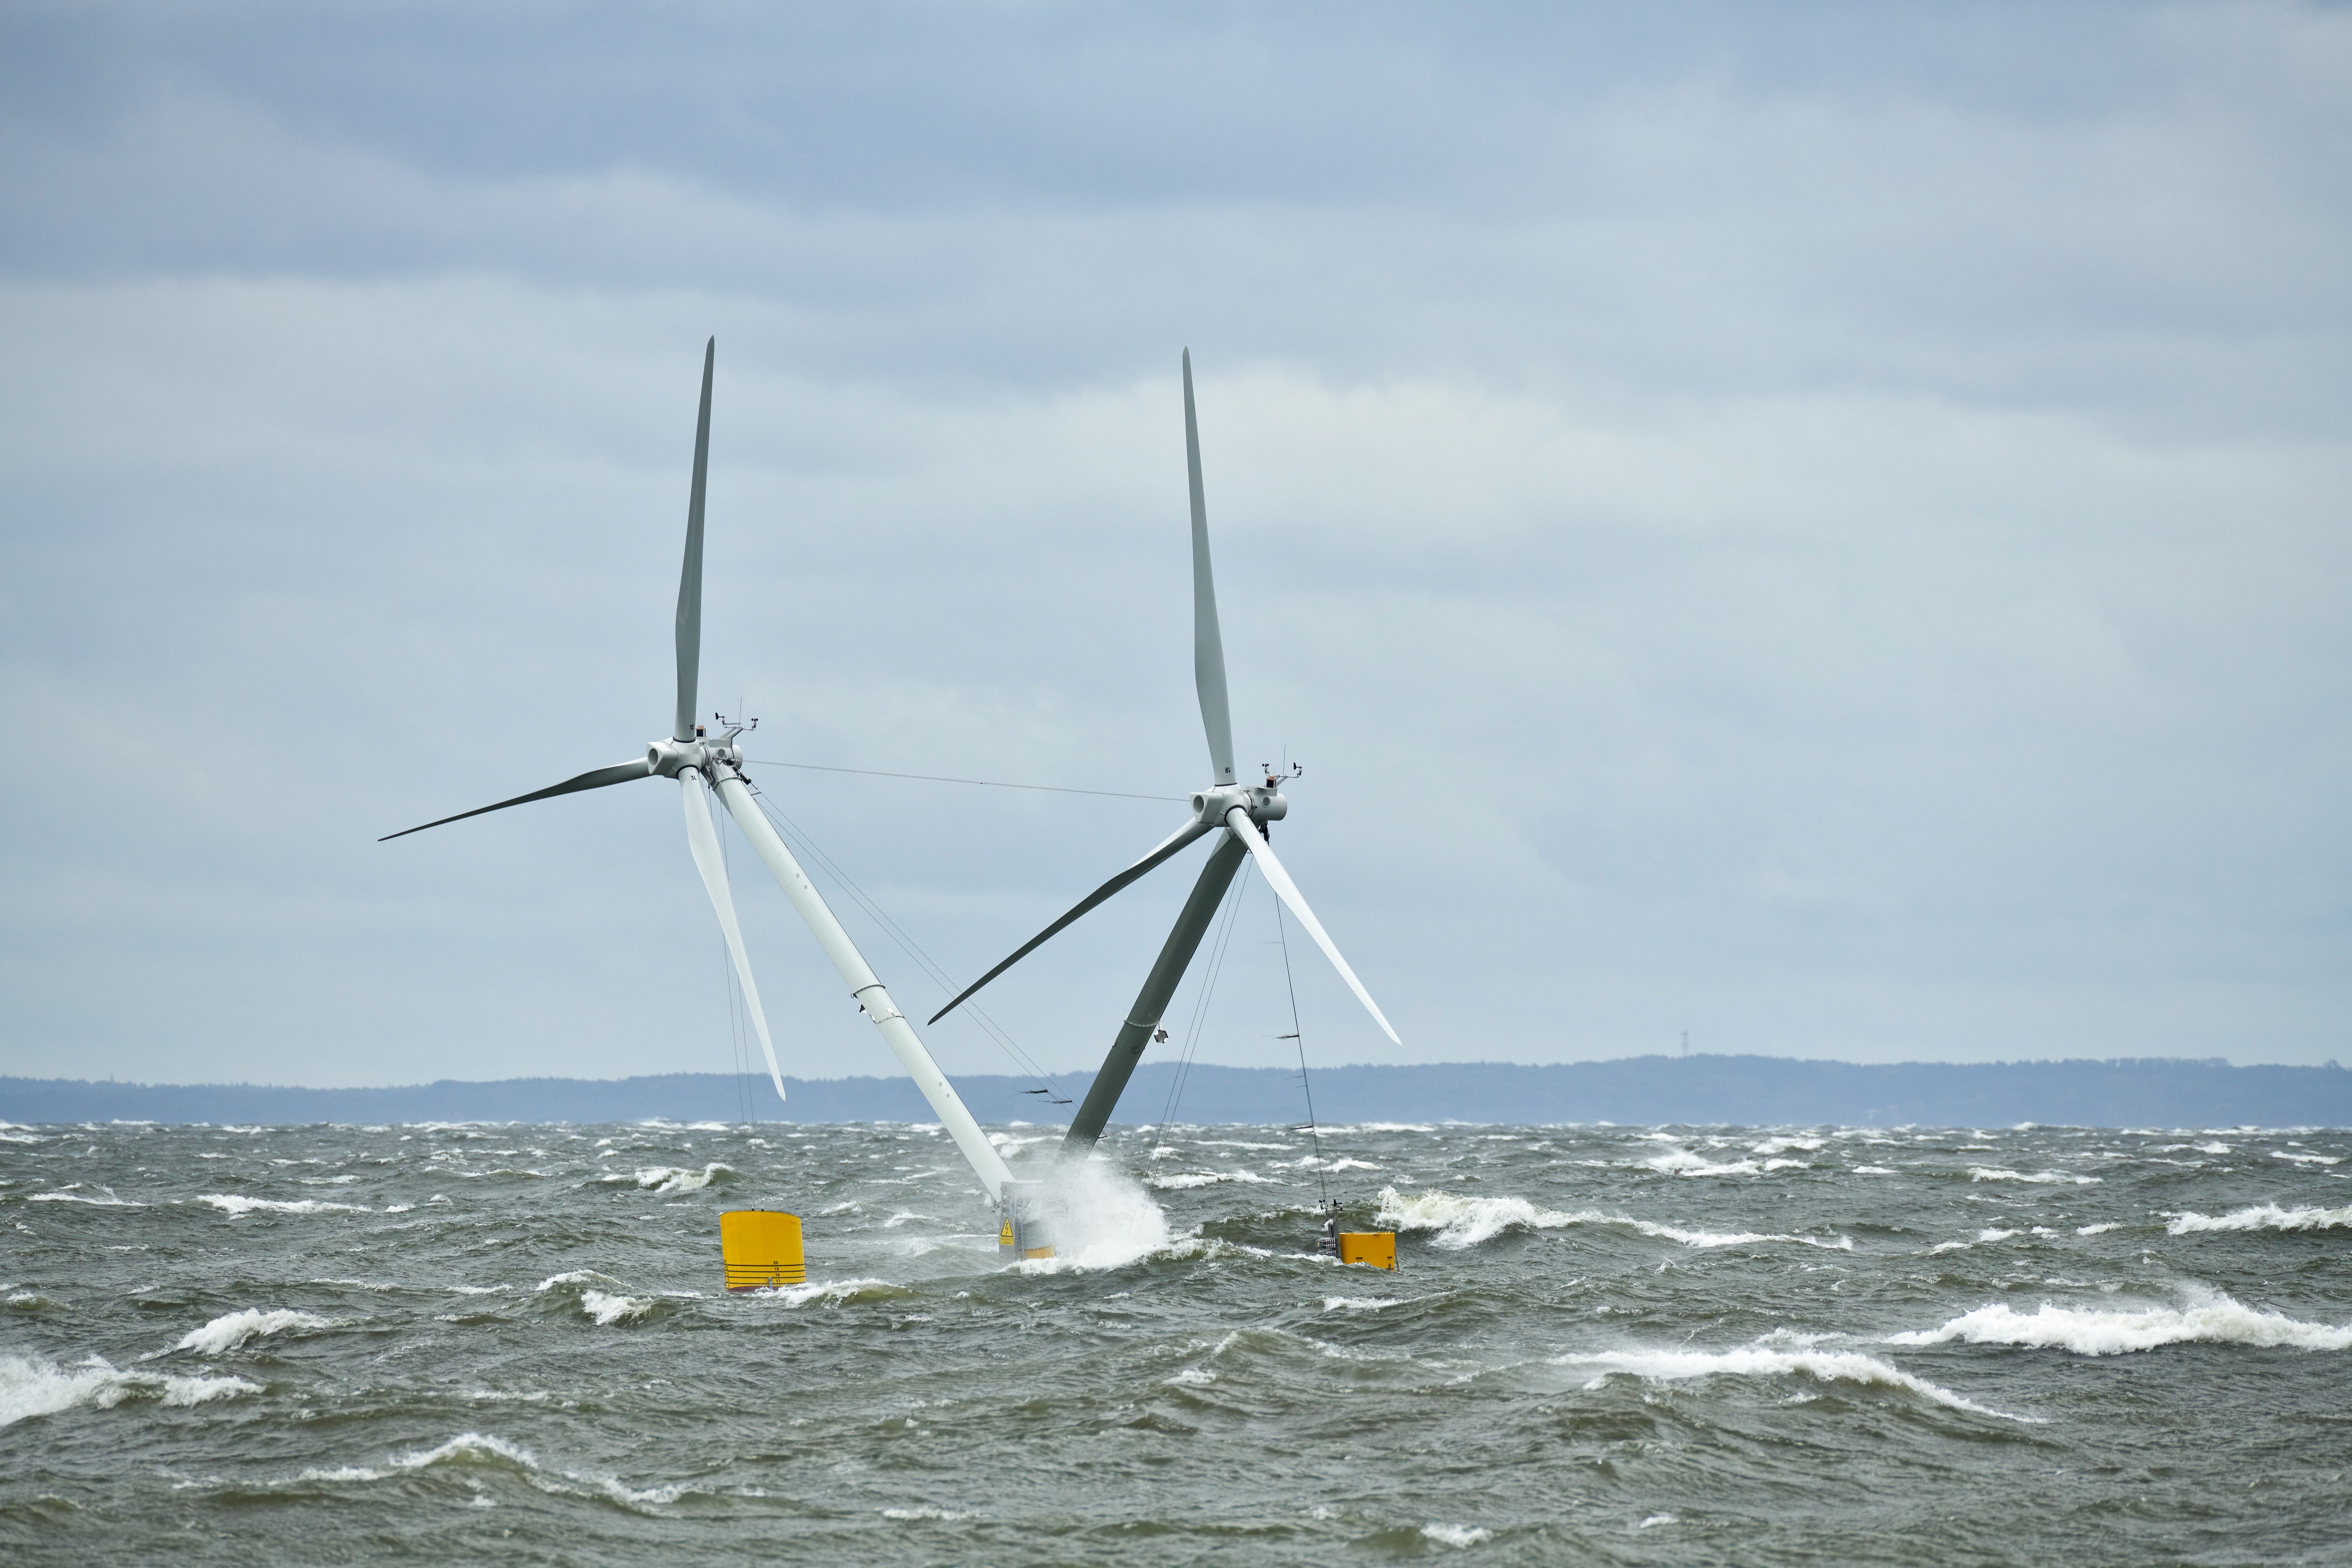 Nezzy² two-turbine platform stable in the water during storm “Gisela”